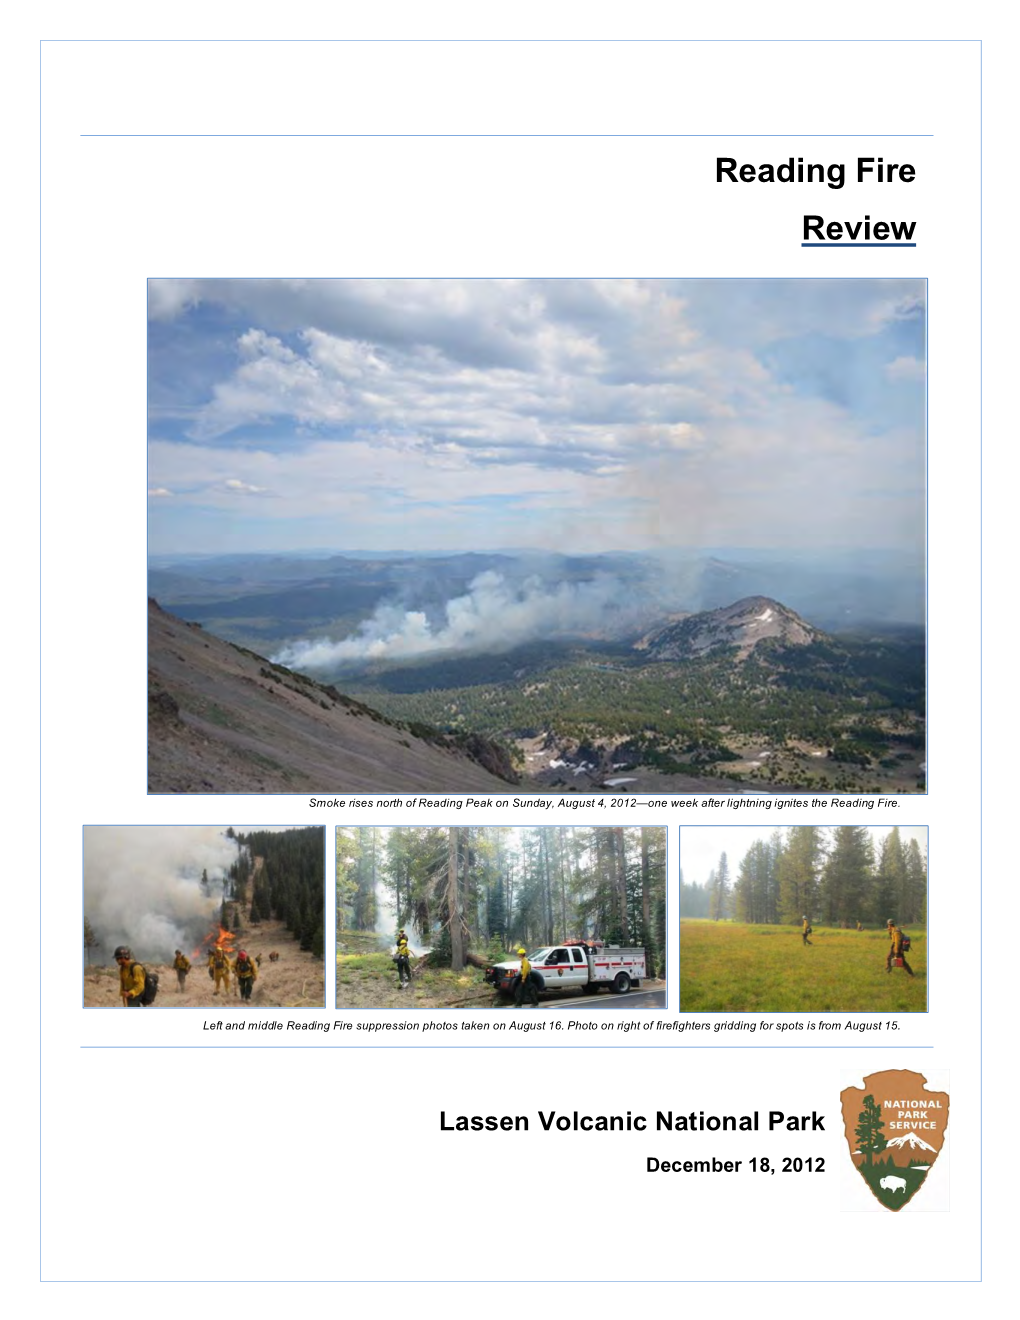 Reading Fire Review